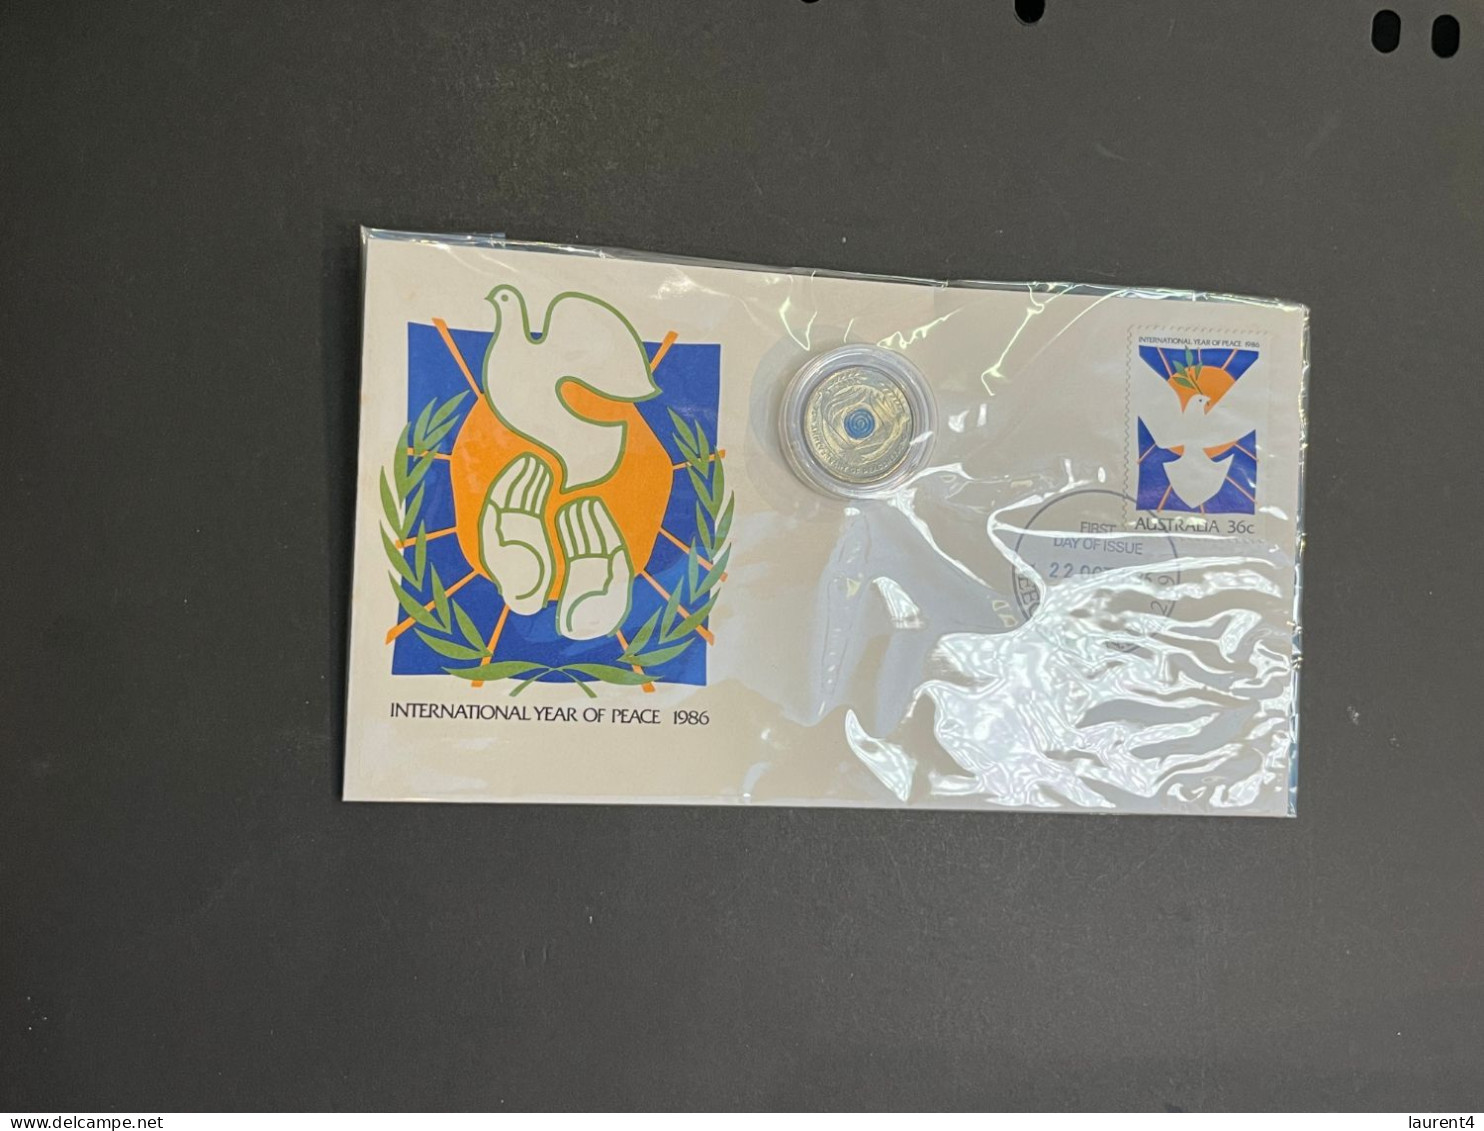 (1 Q 44) Int. Year Of Peace FDC Cover + $ 2.00 Colored UN Peace Keeping Coin (military) - 2 Dollars